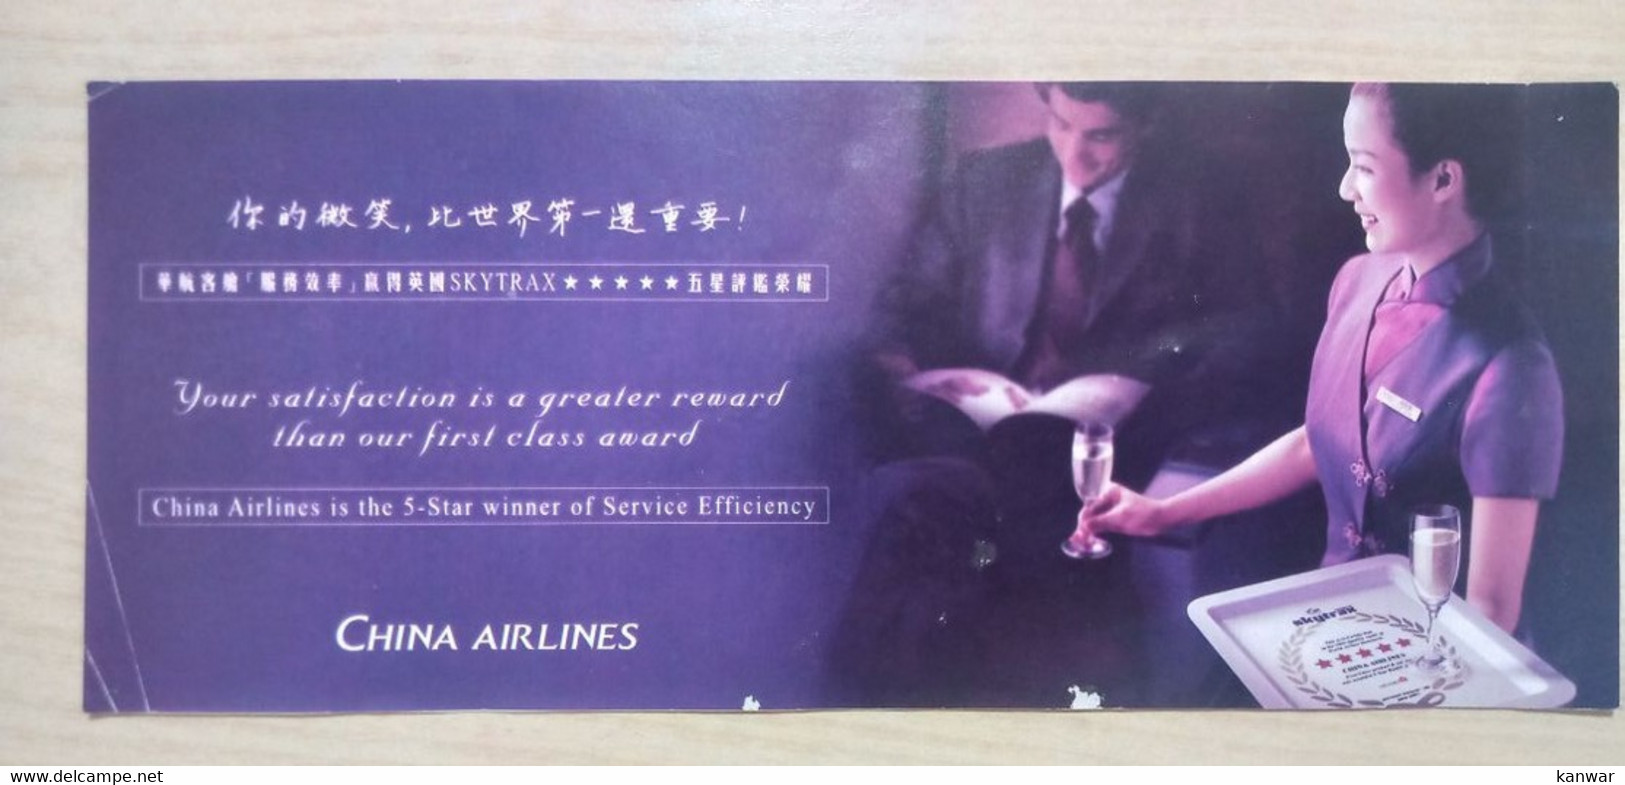 CHINA AIRLINES PASSENGER TICKET AND BAGGAGE CHECK - Billetes